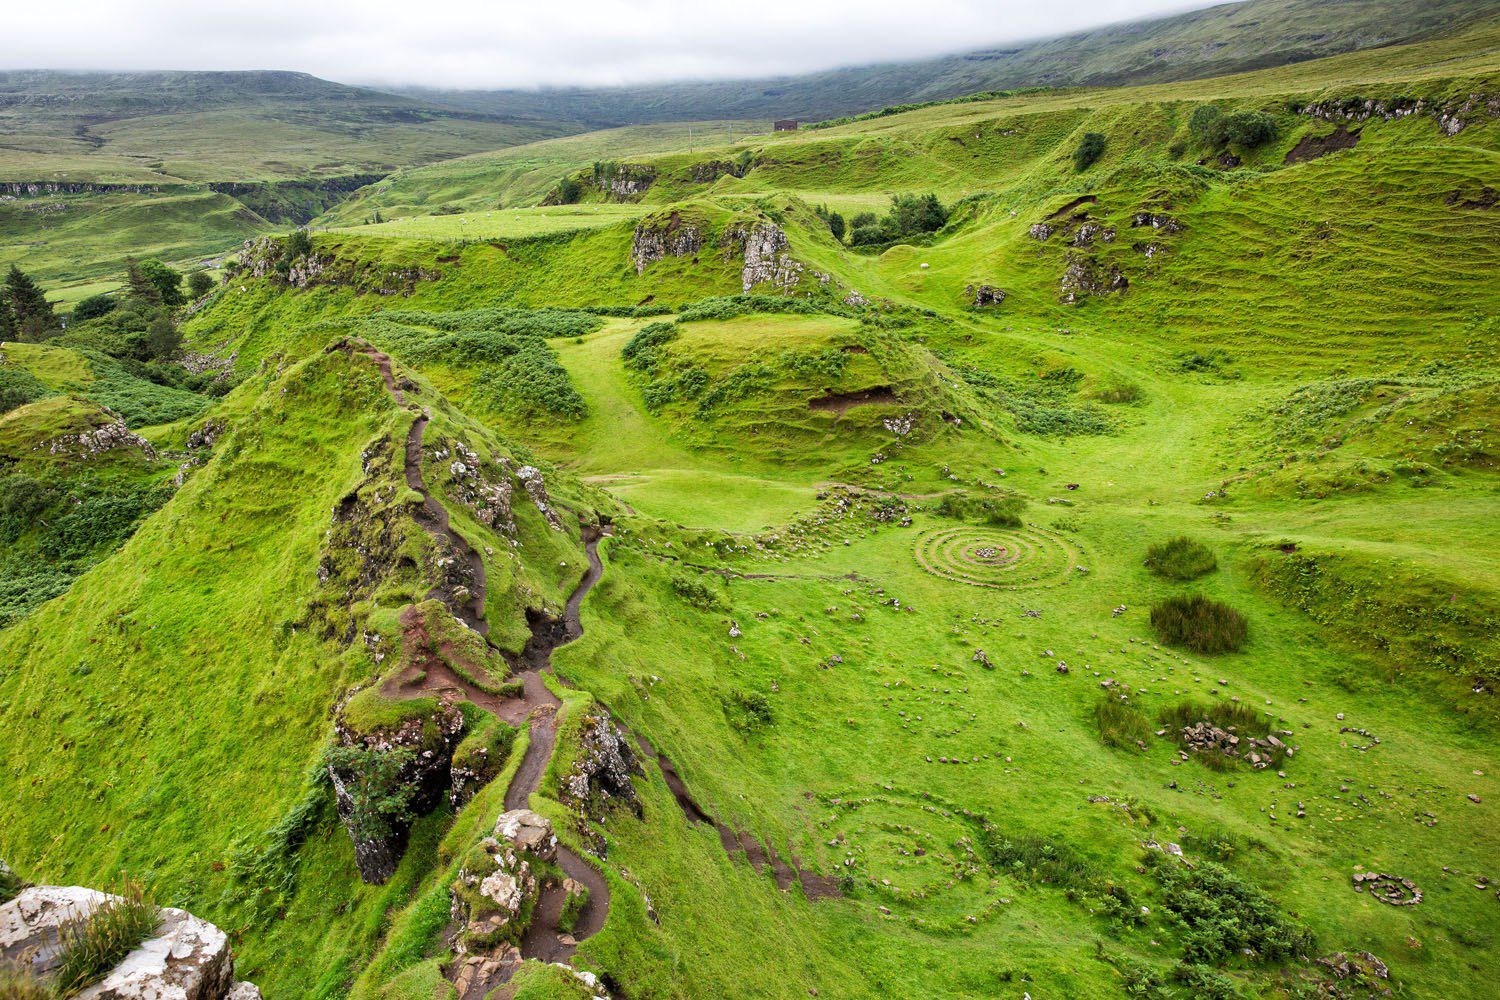 Fairy Glen: Legend says these smalls hills that were caused by a landslip are home to the magical Skye fairies